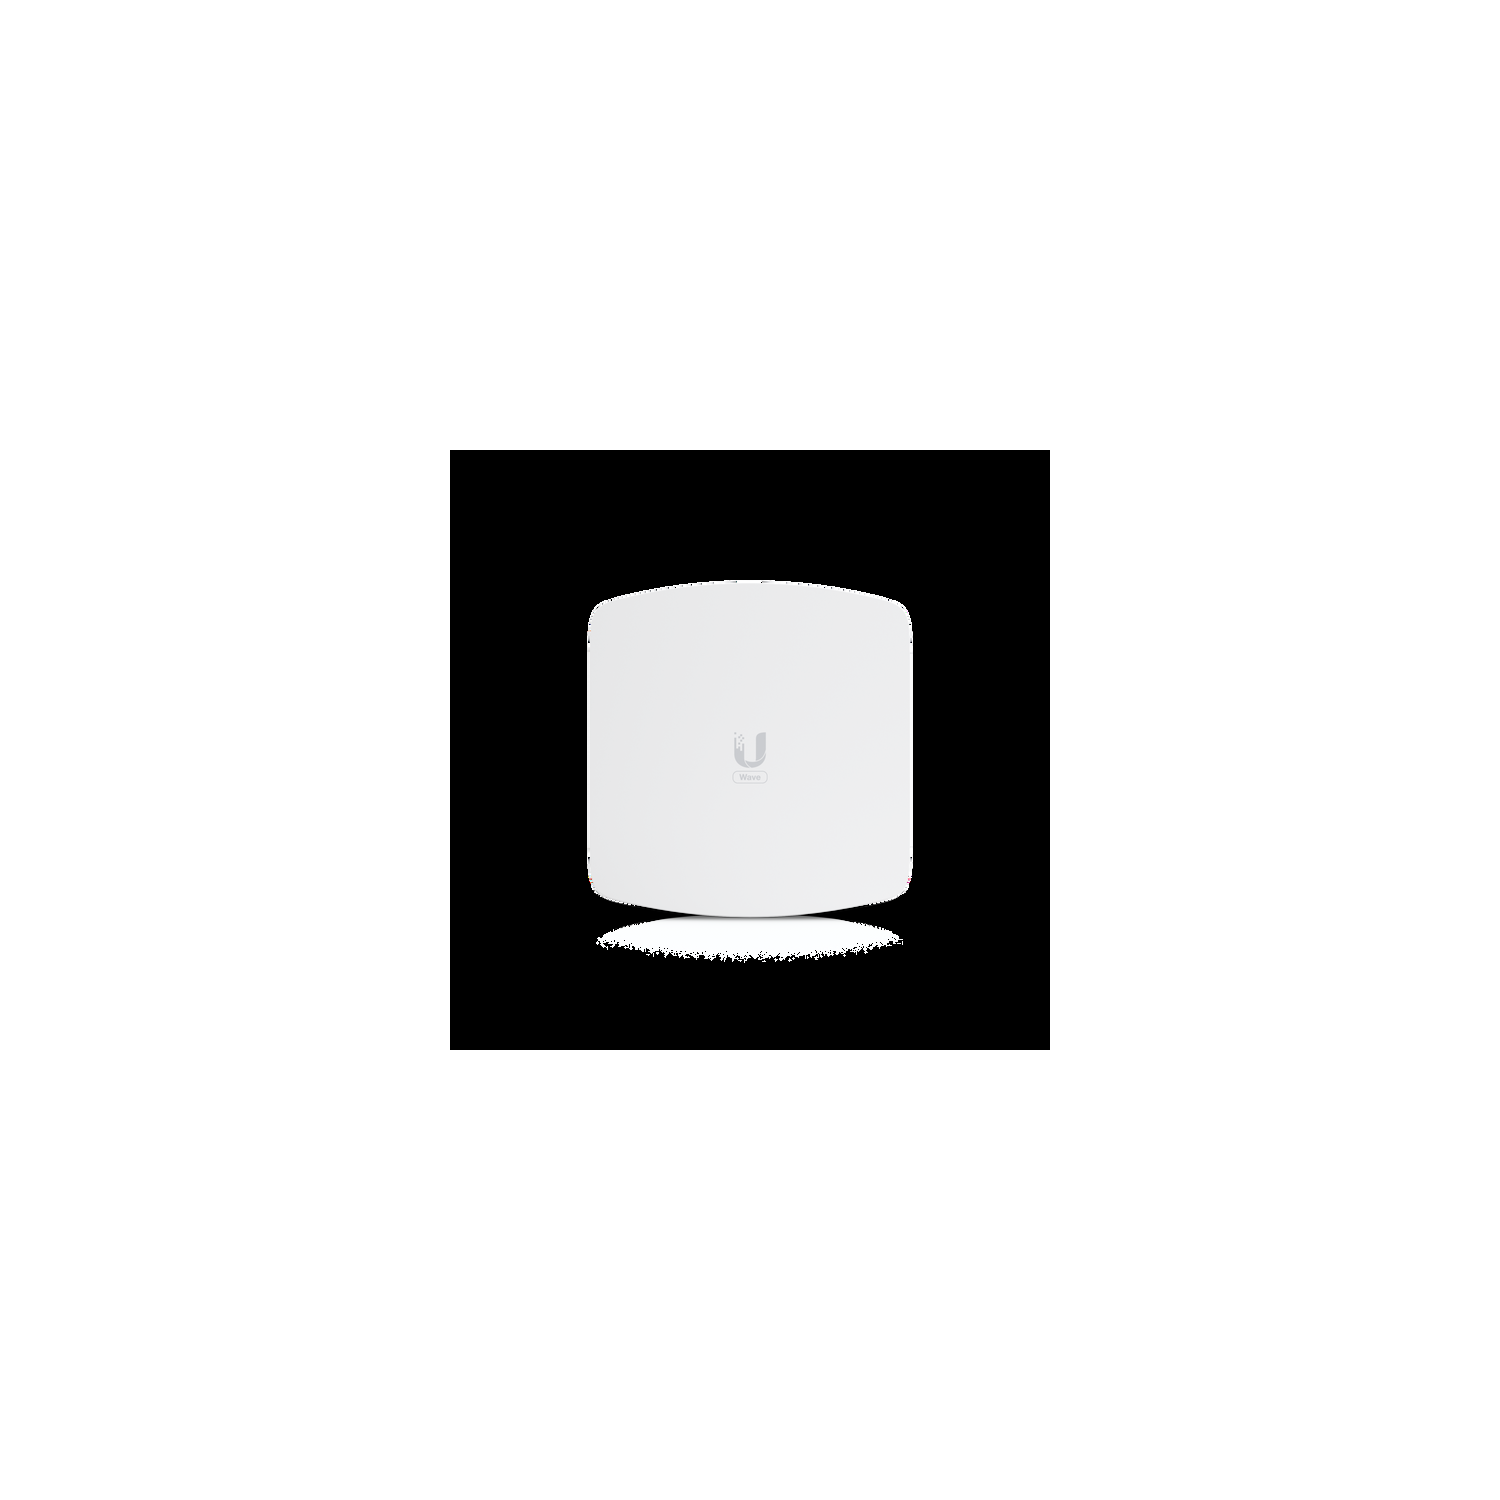 Ubiquiti UISP Wave Access Point Full Duplex 60-GHz PtMP AP Powered by Wave Technology - White